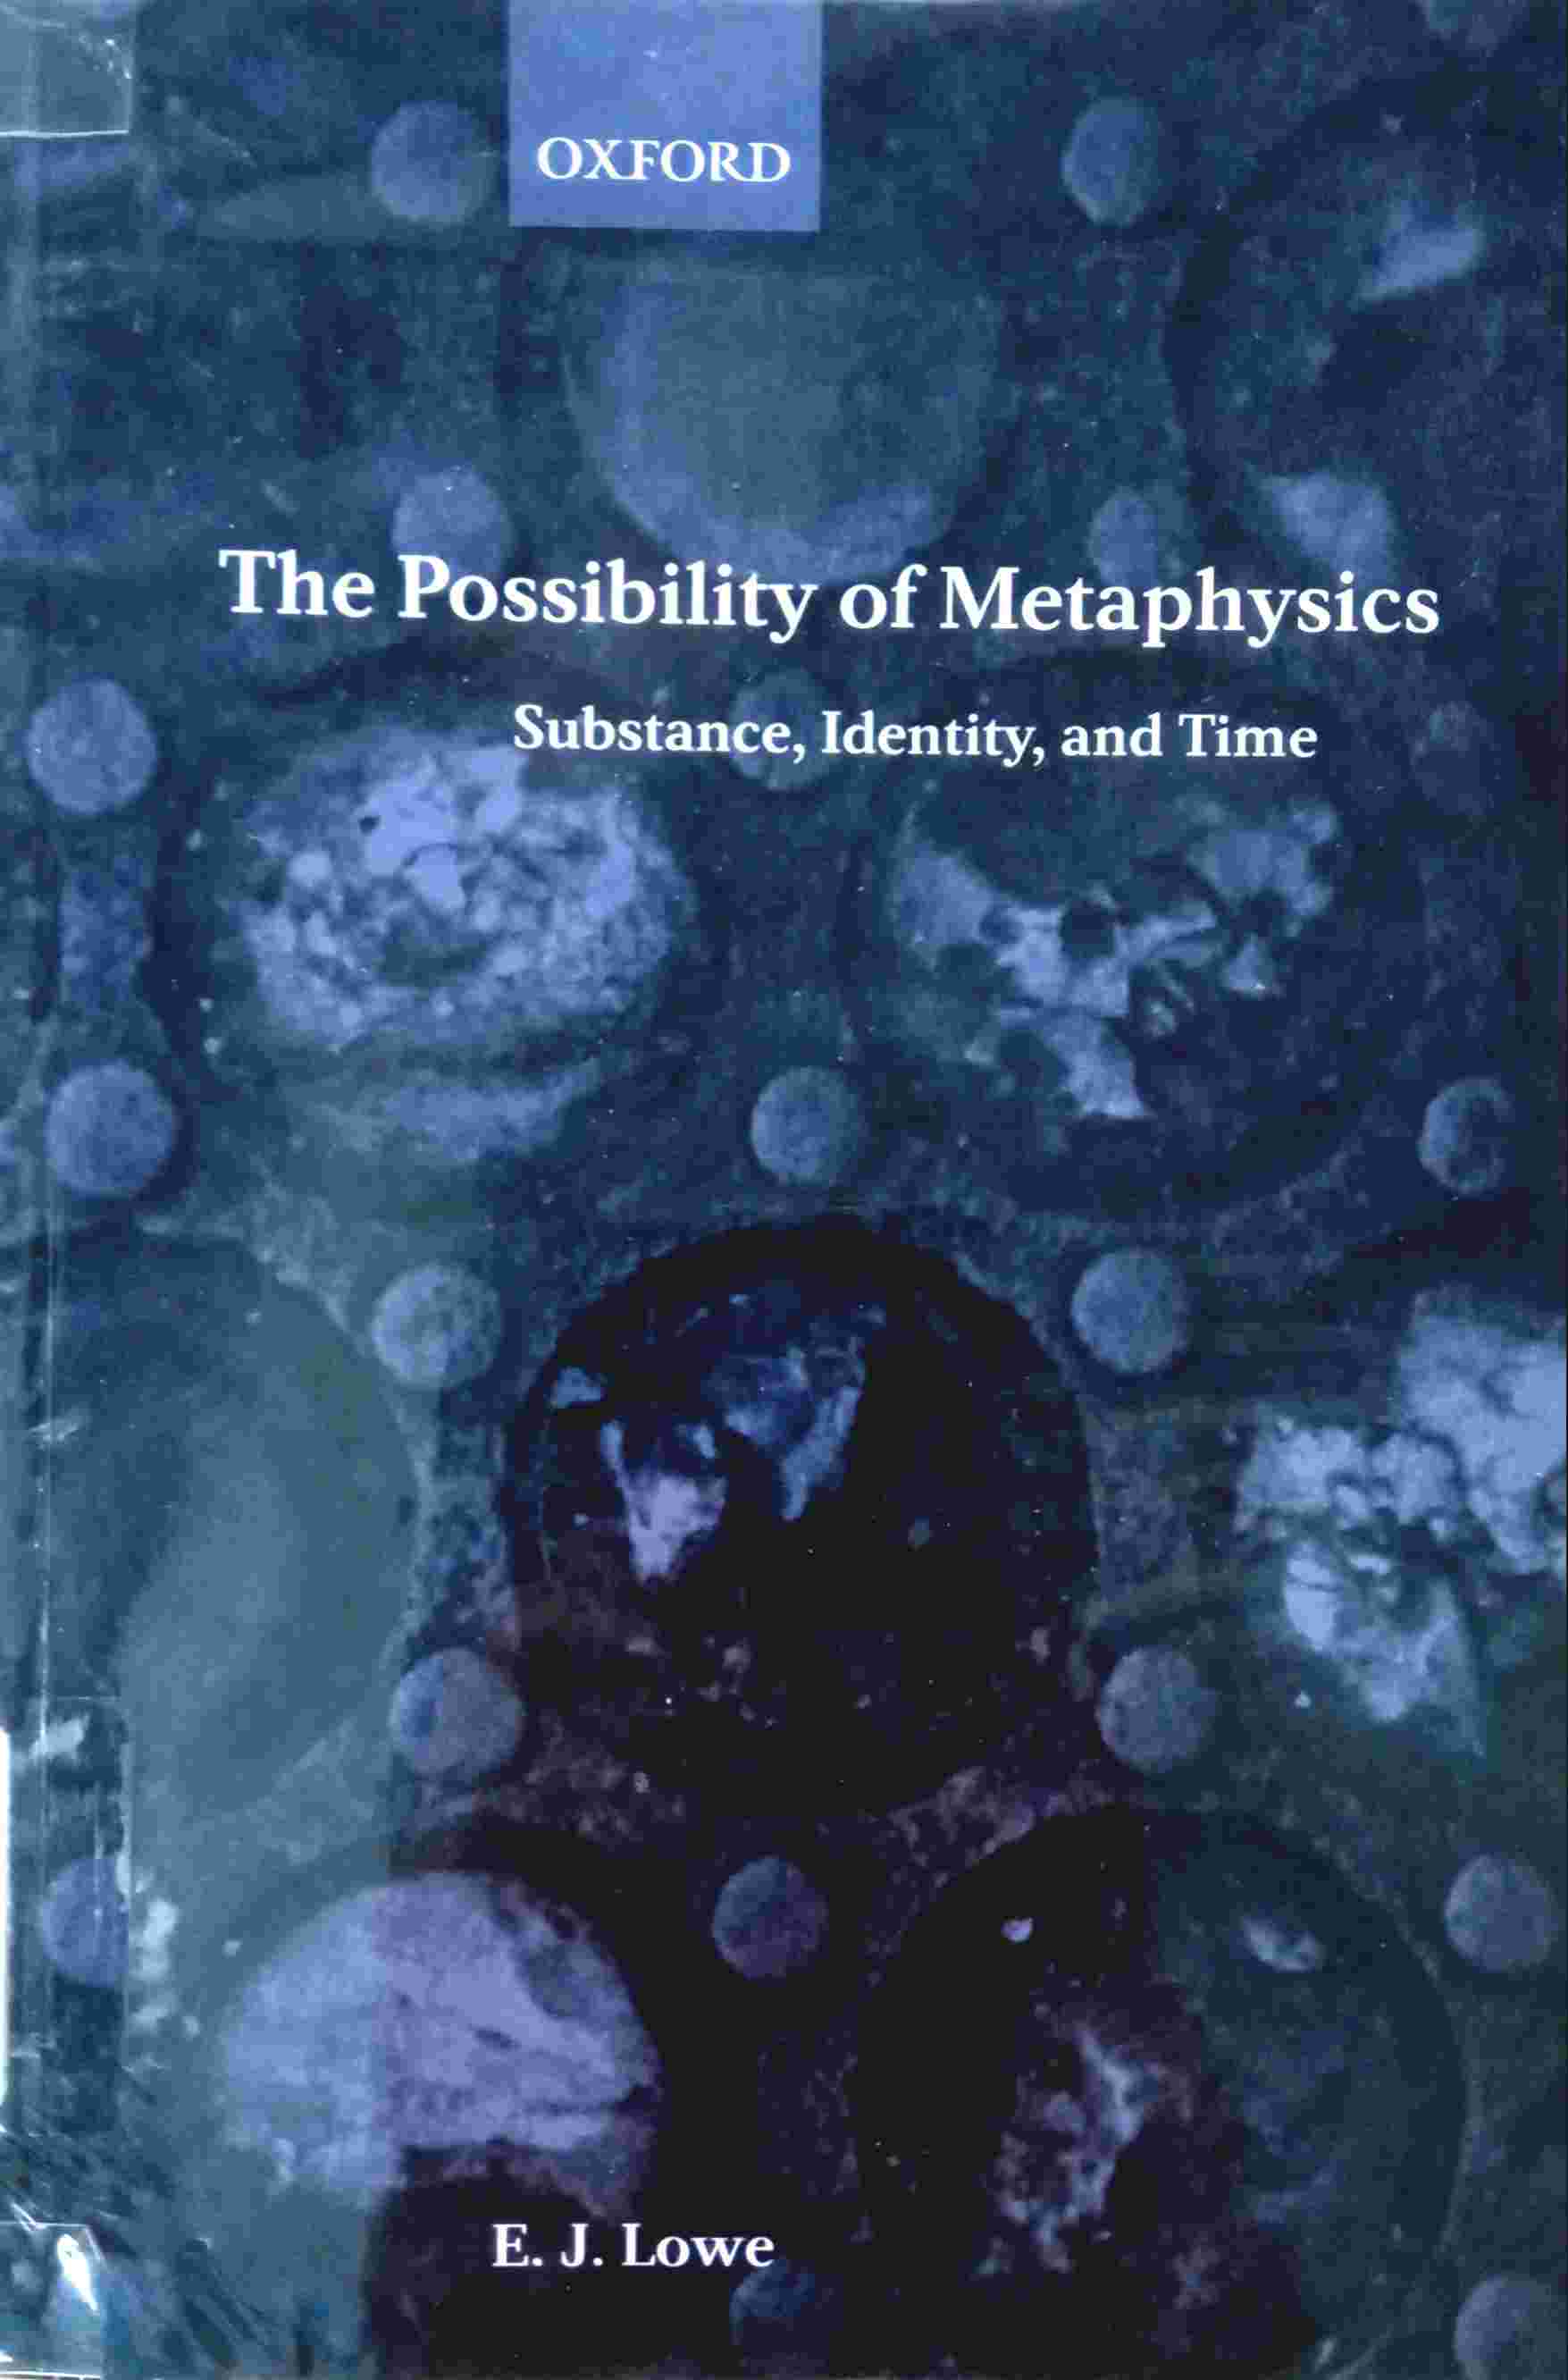 THE POSSIBILITY OF METAPHYSICS